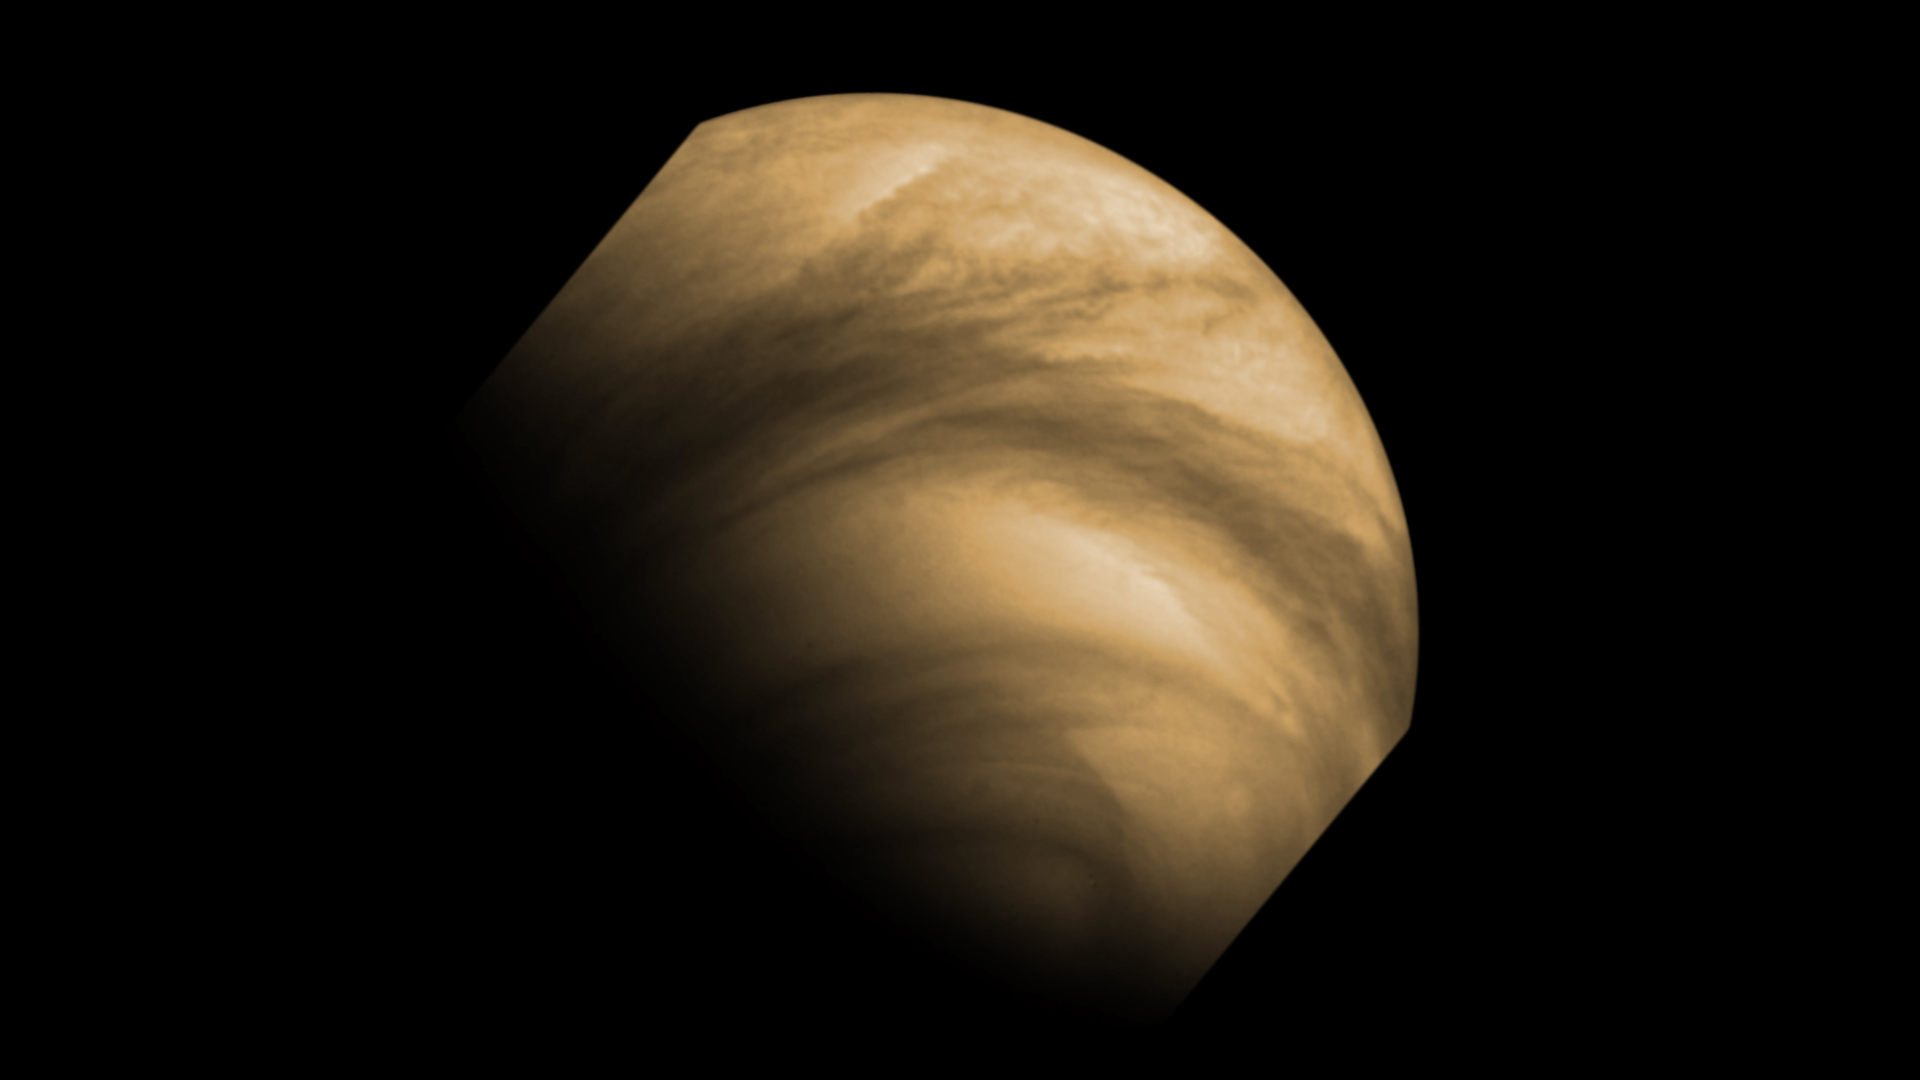 A false-colour image of cloud features seen on Venus by the Venus Monitoring Camera (VMC) on the European Space Agency's Venus Express probe captured on 8 December 2011.